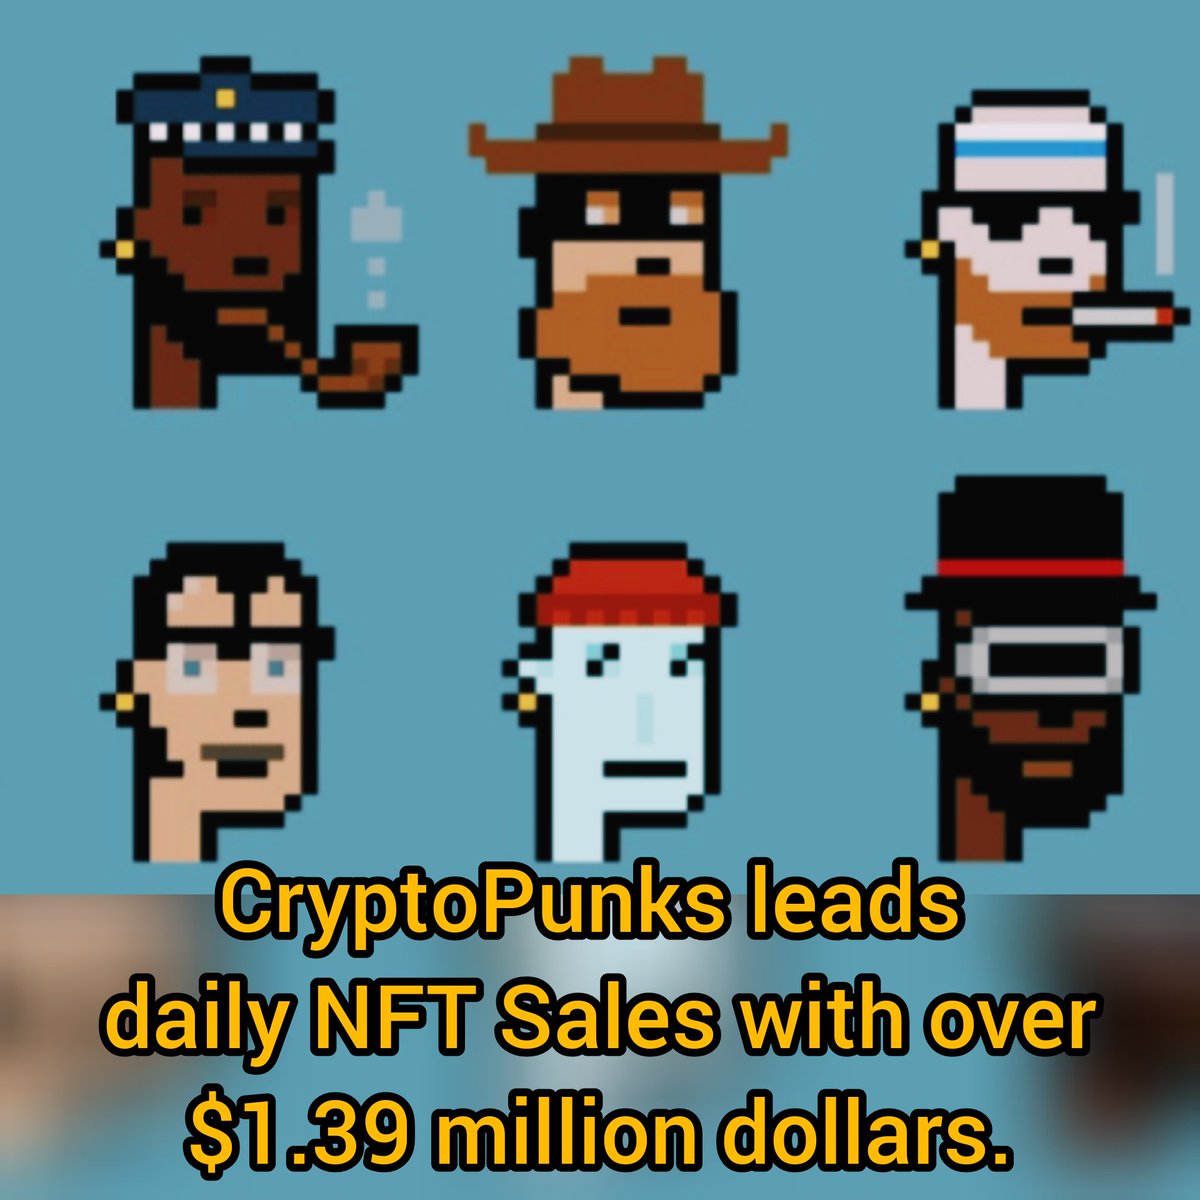 CryptoPunks leads daily NFT sales with over US$1.39 million.

CryptoPunks dominated the non-fungible token (NFT) market with a US$1.39 million daily sales volume on May 12, according to CryptoSlam data.

Source: forkast.news
#NFT #NFTs #nftart